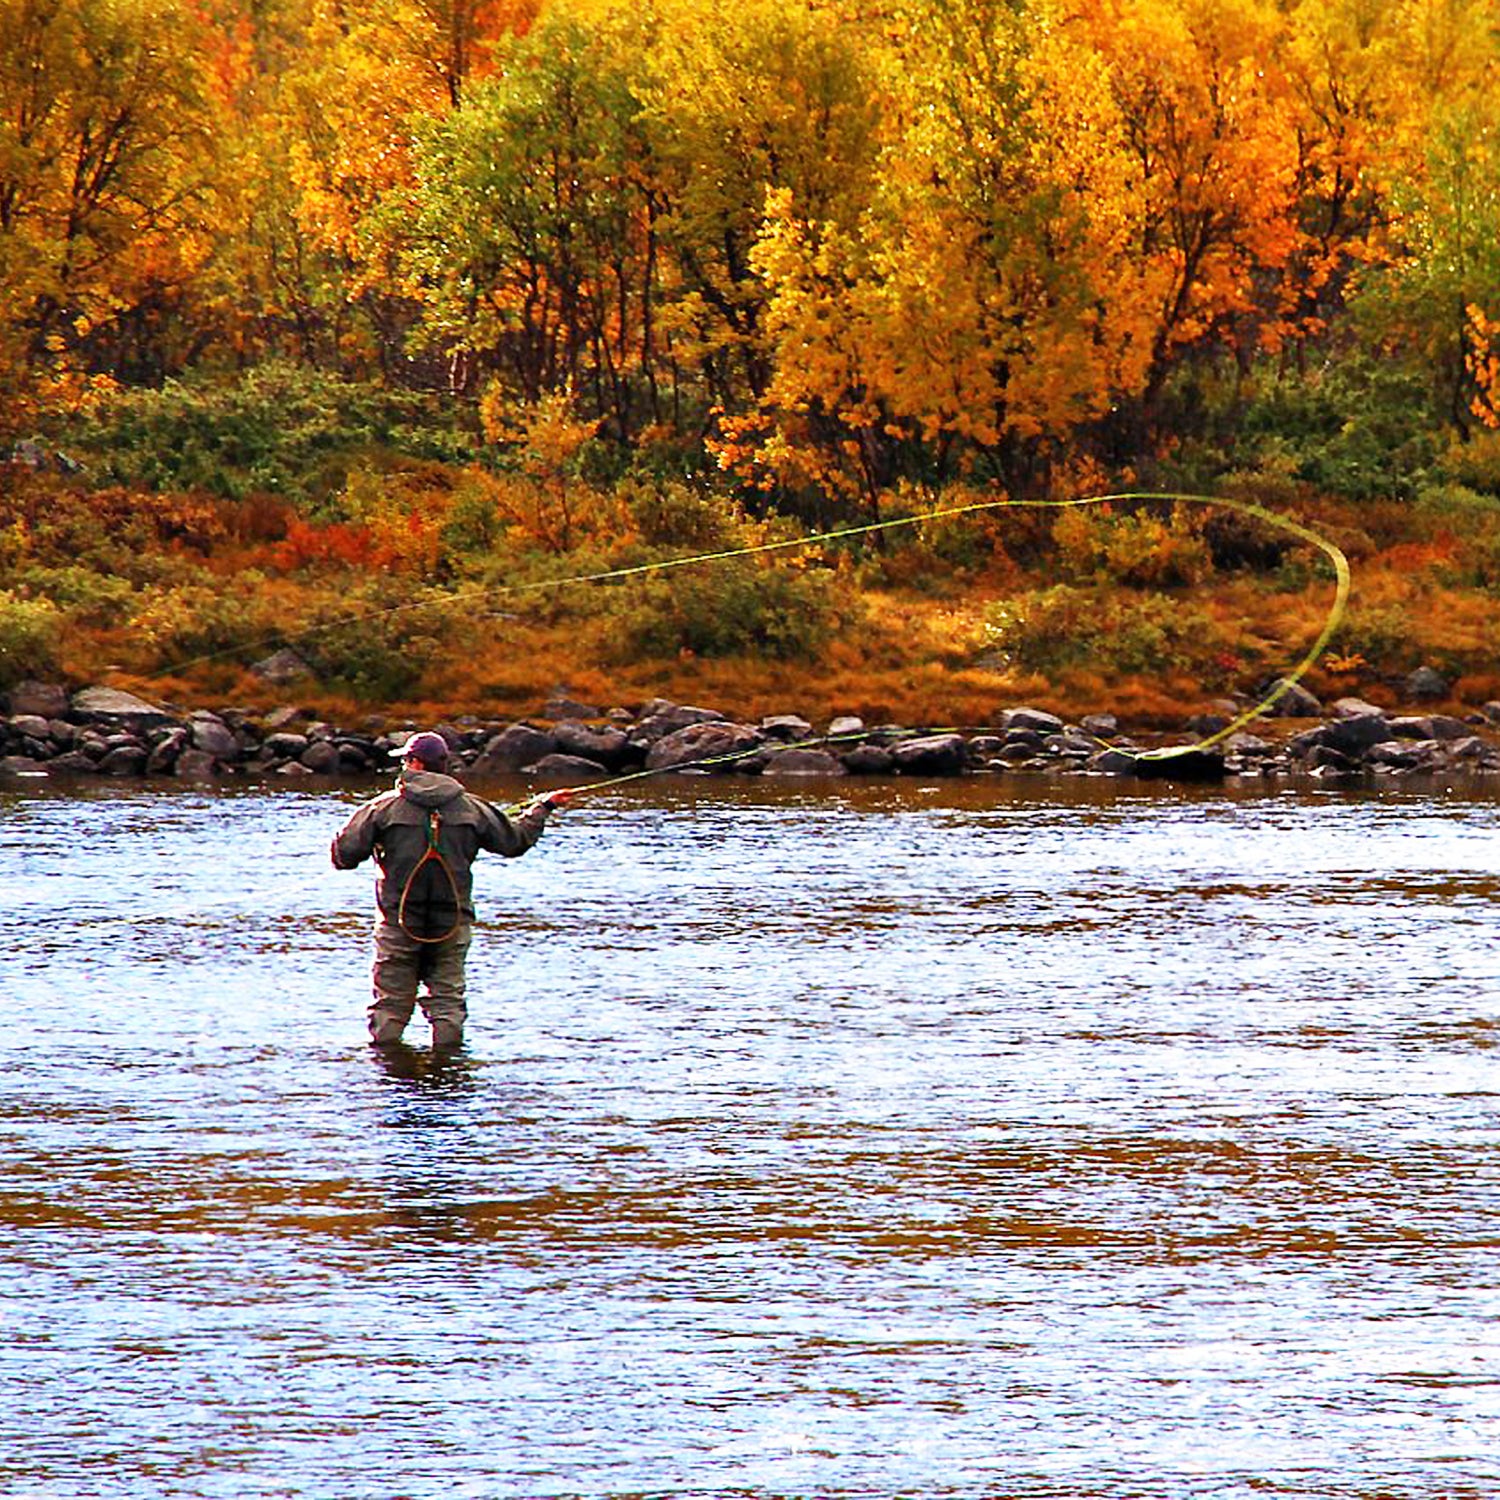 https://cdn.outsideonline.com/wp-content/uploads/migrated-images_parent/migrated-images_78/fly-fishing-fall-cast_s.jpg